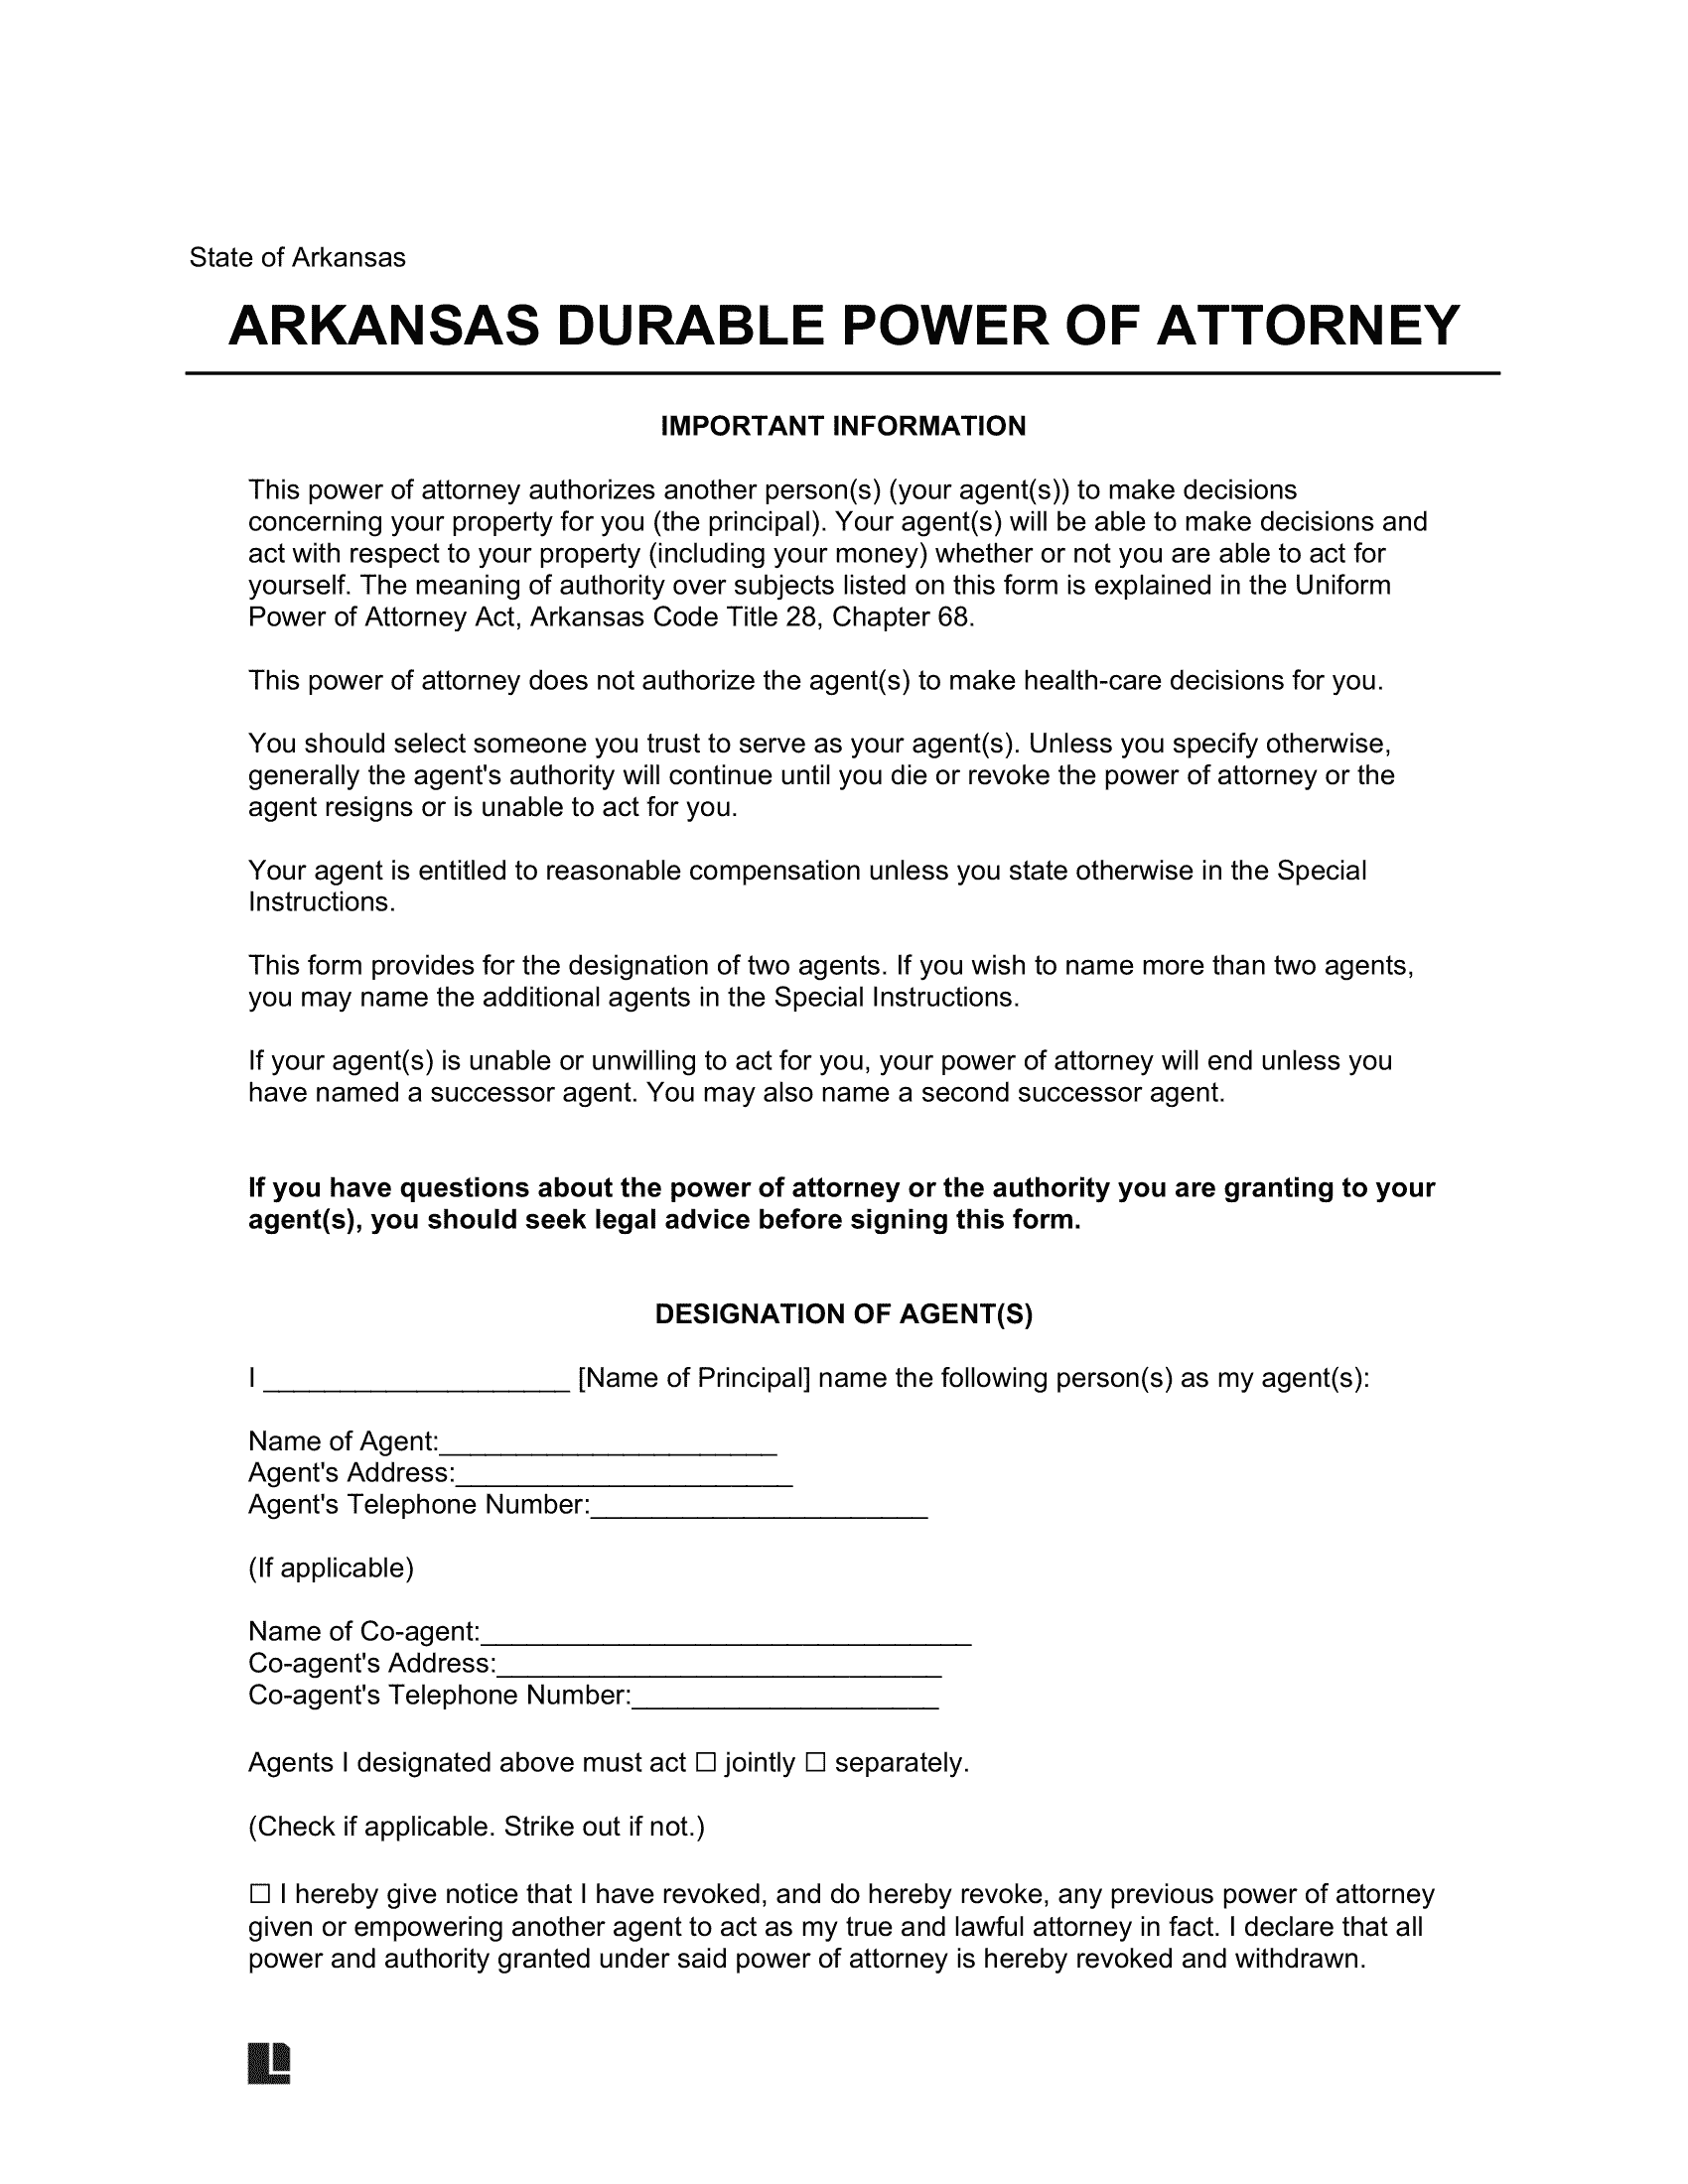 Free Arkansas Durable Statutory Power Of Attorney Form Pdf And Word 0796